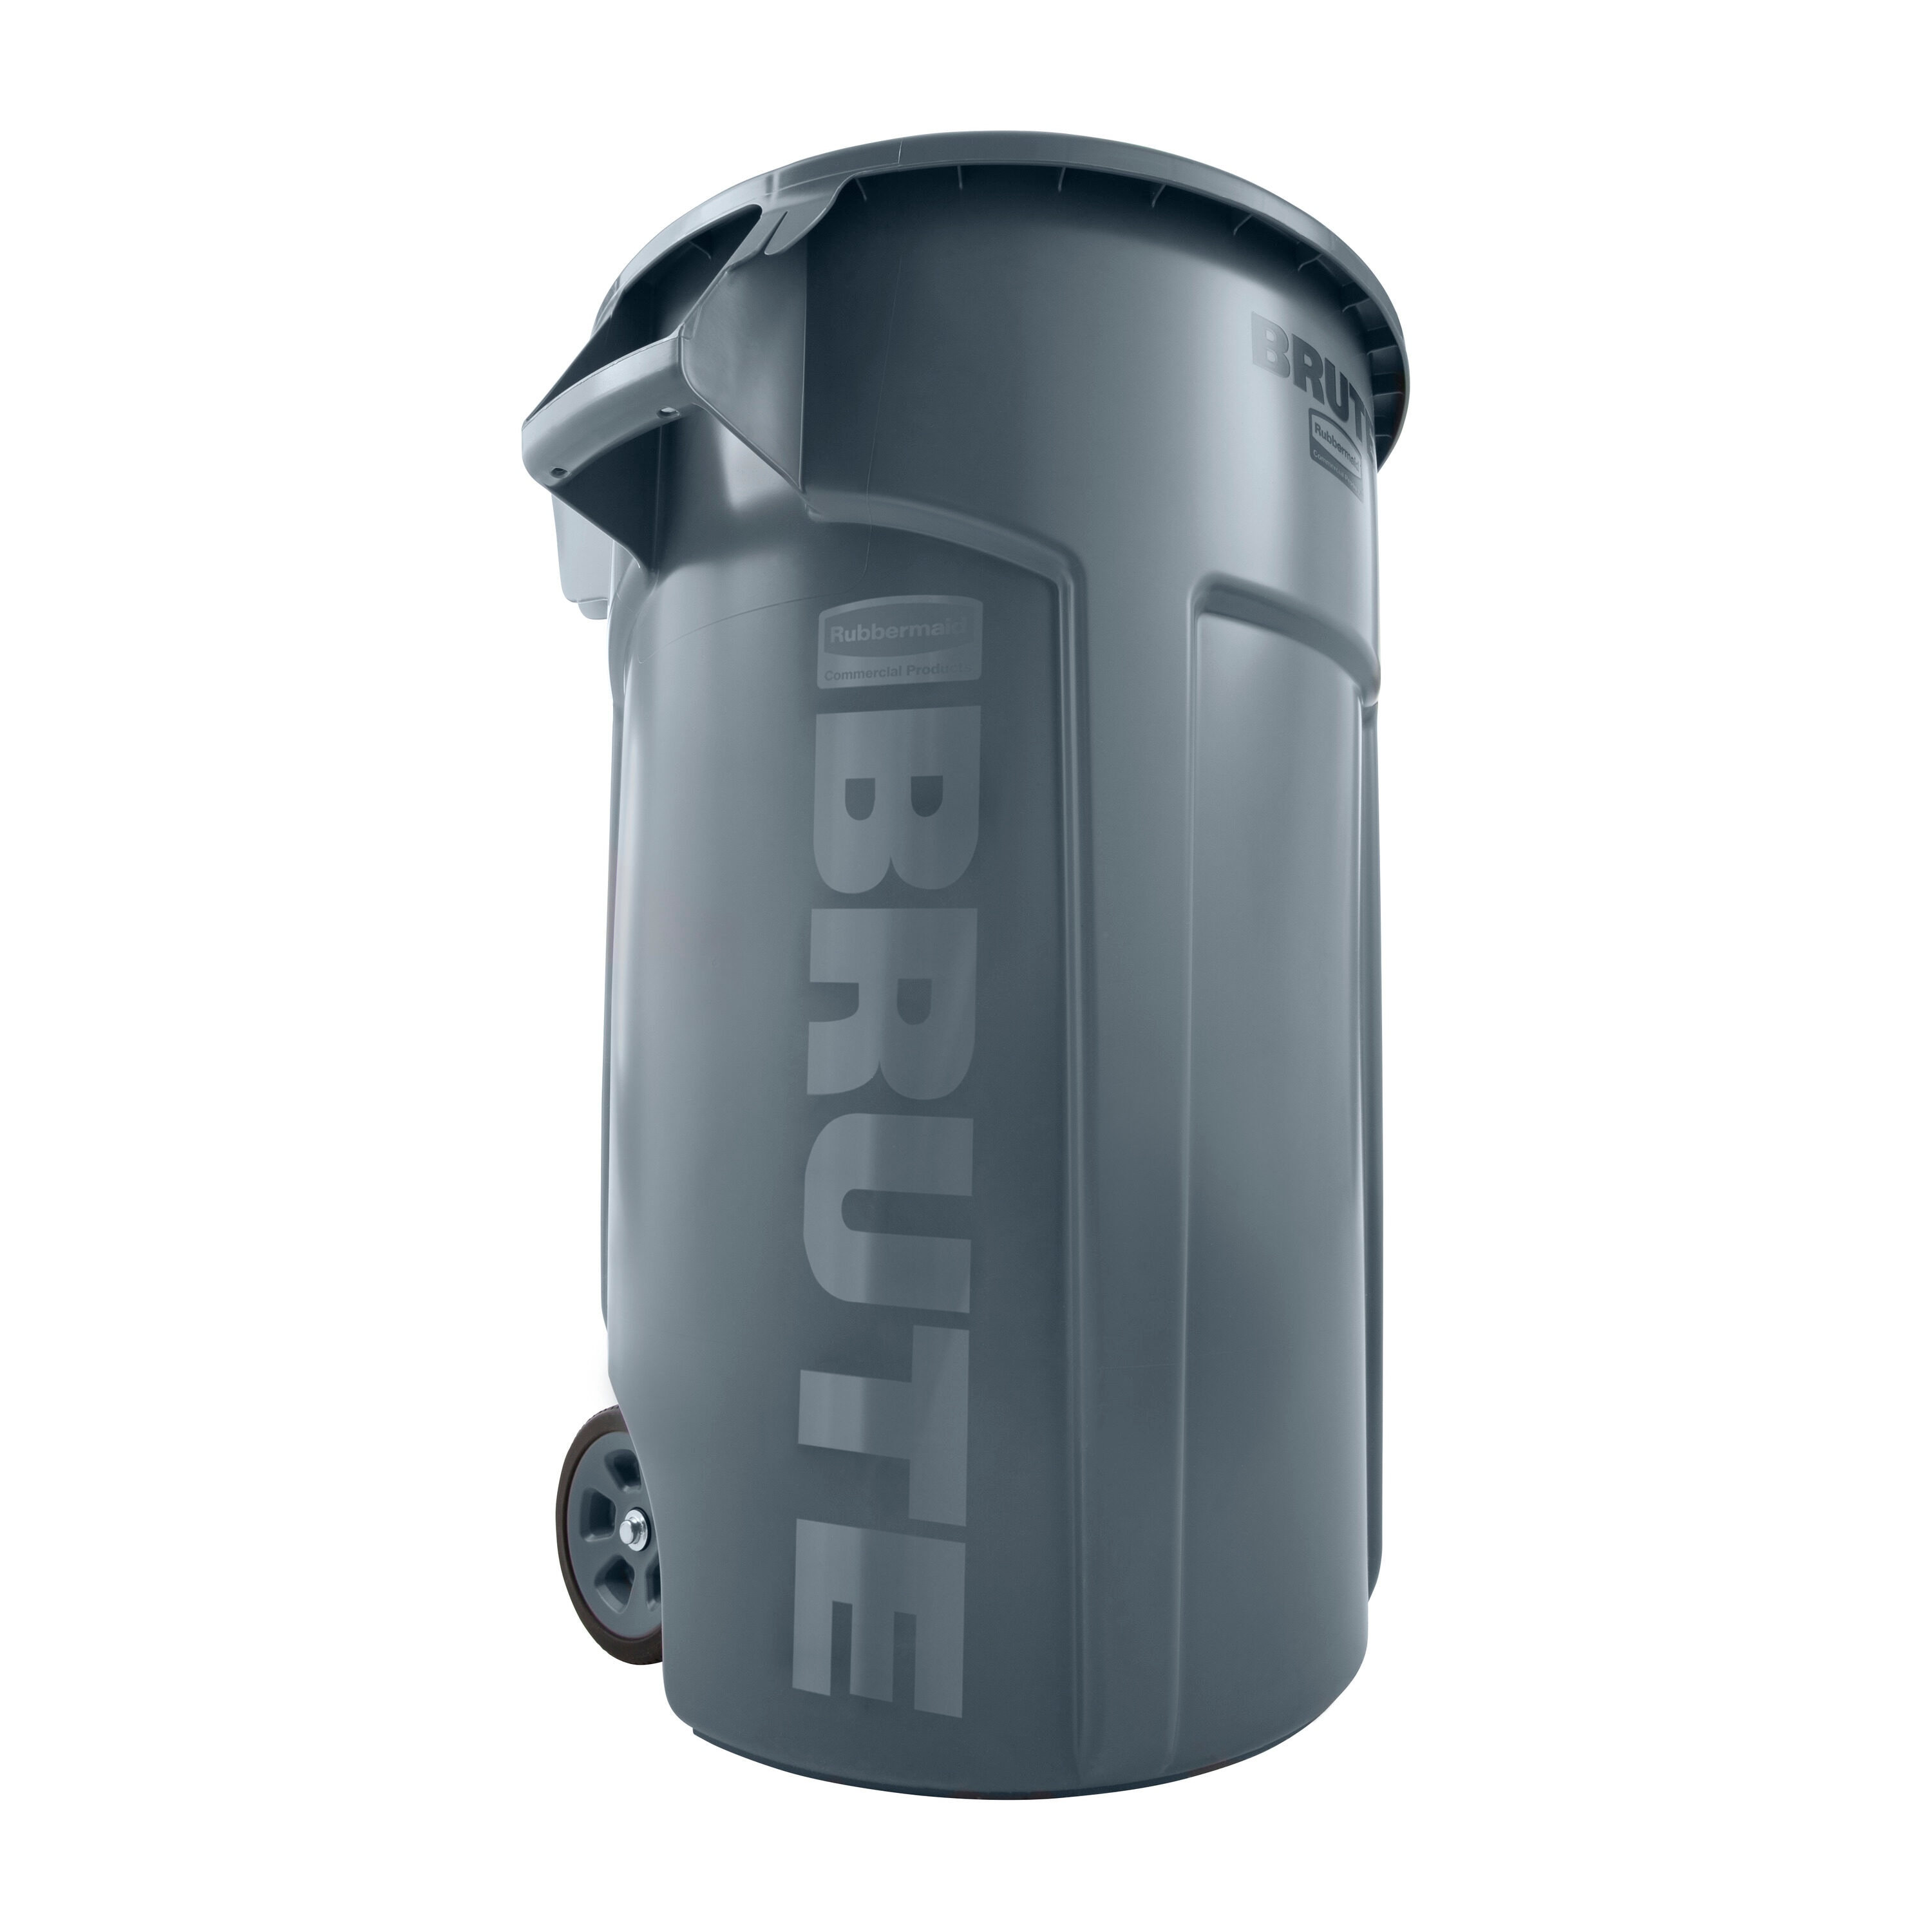 Rubbermaid Commercial Brute Vented Trash Receptacle Round 44 gallon Blue  Sold as one waste receptacle - Office Depot